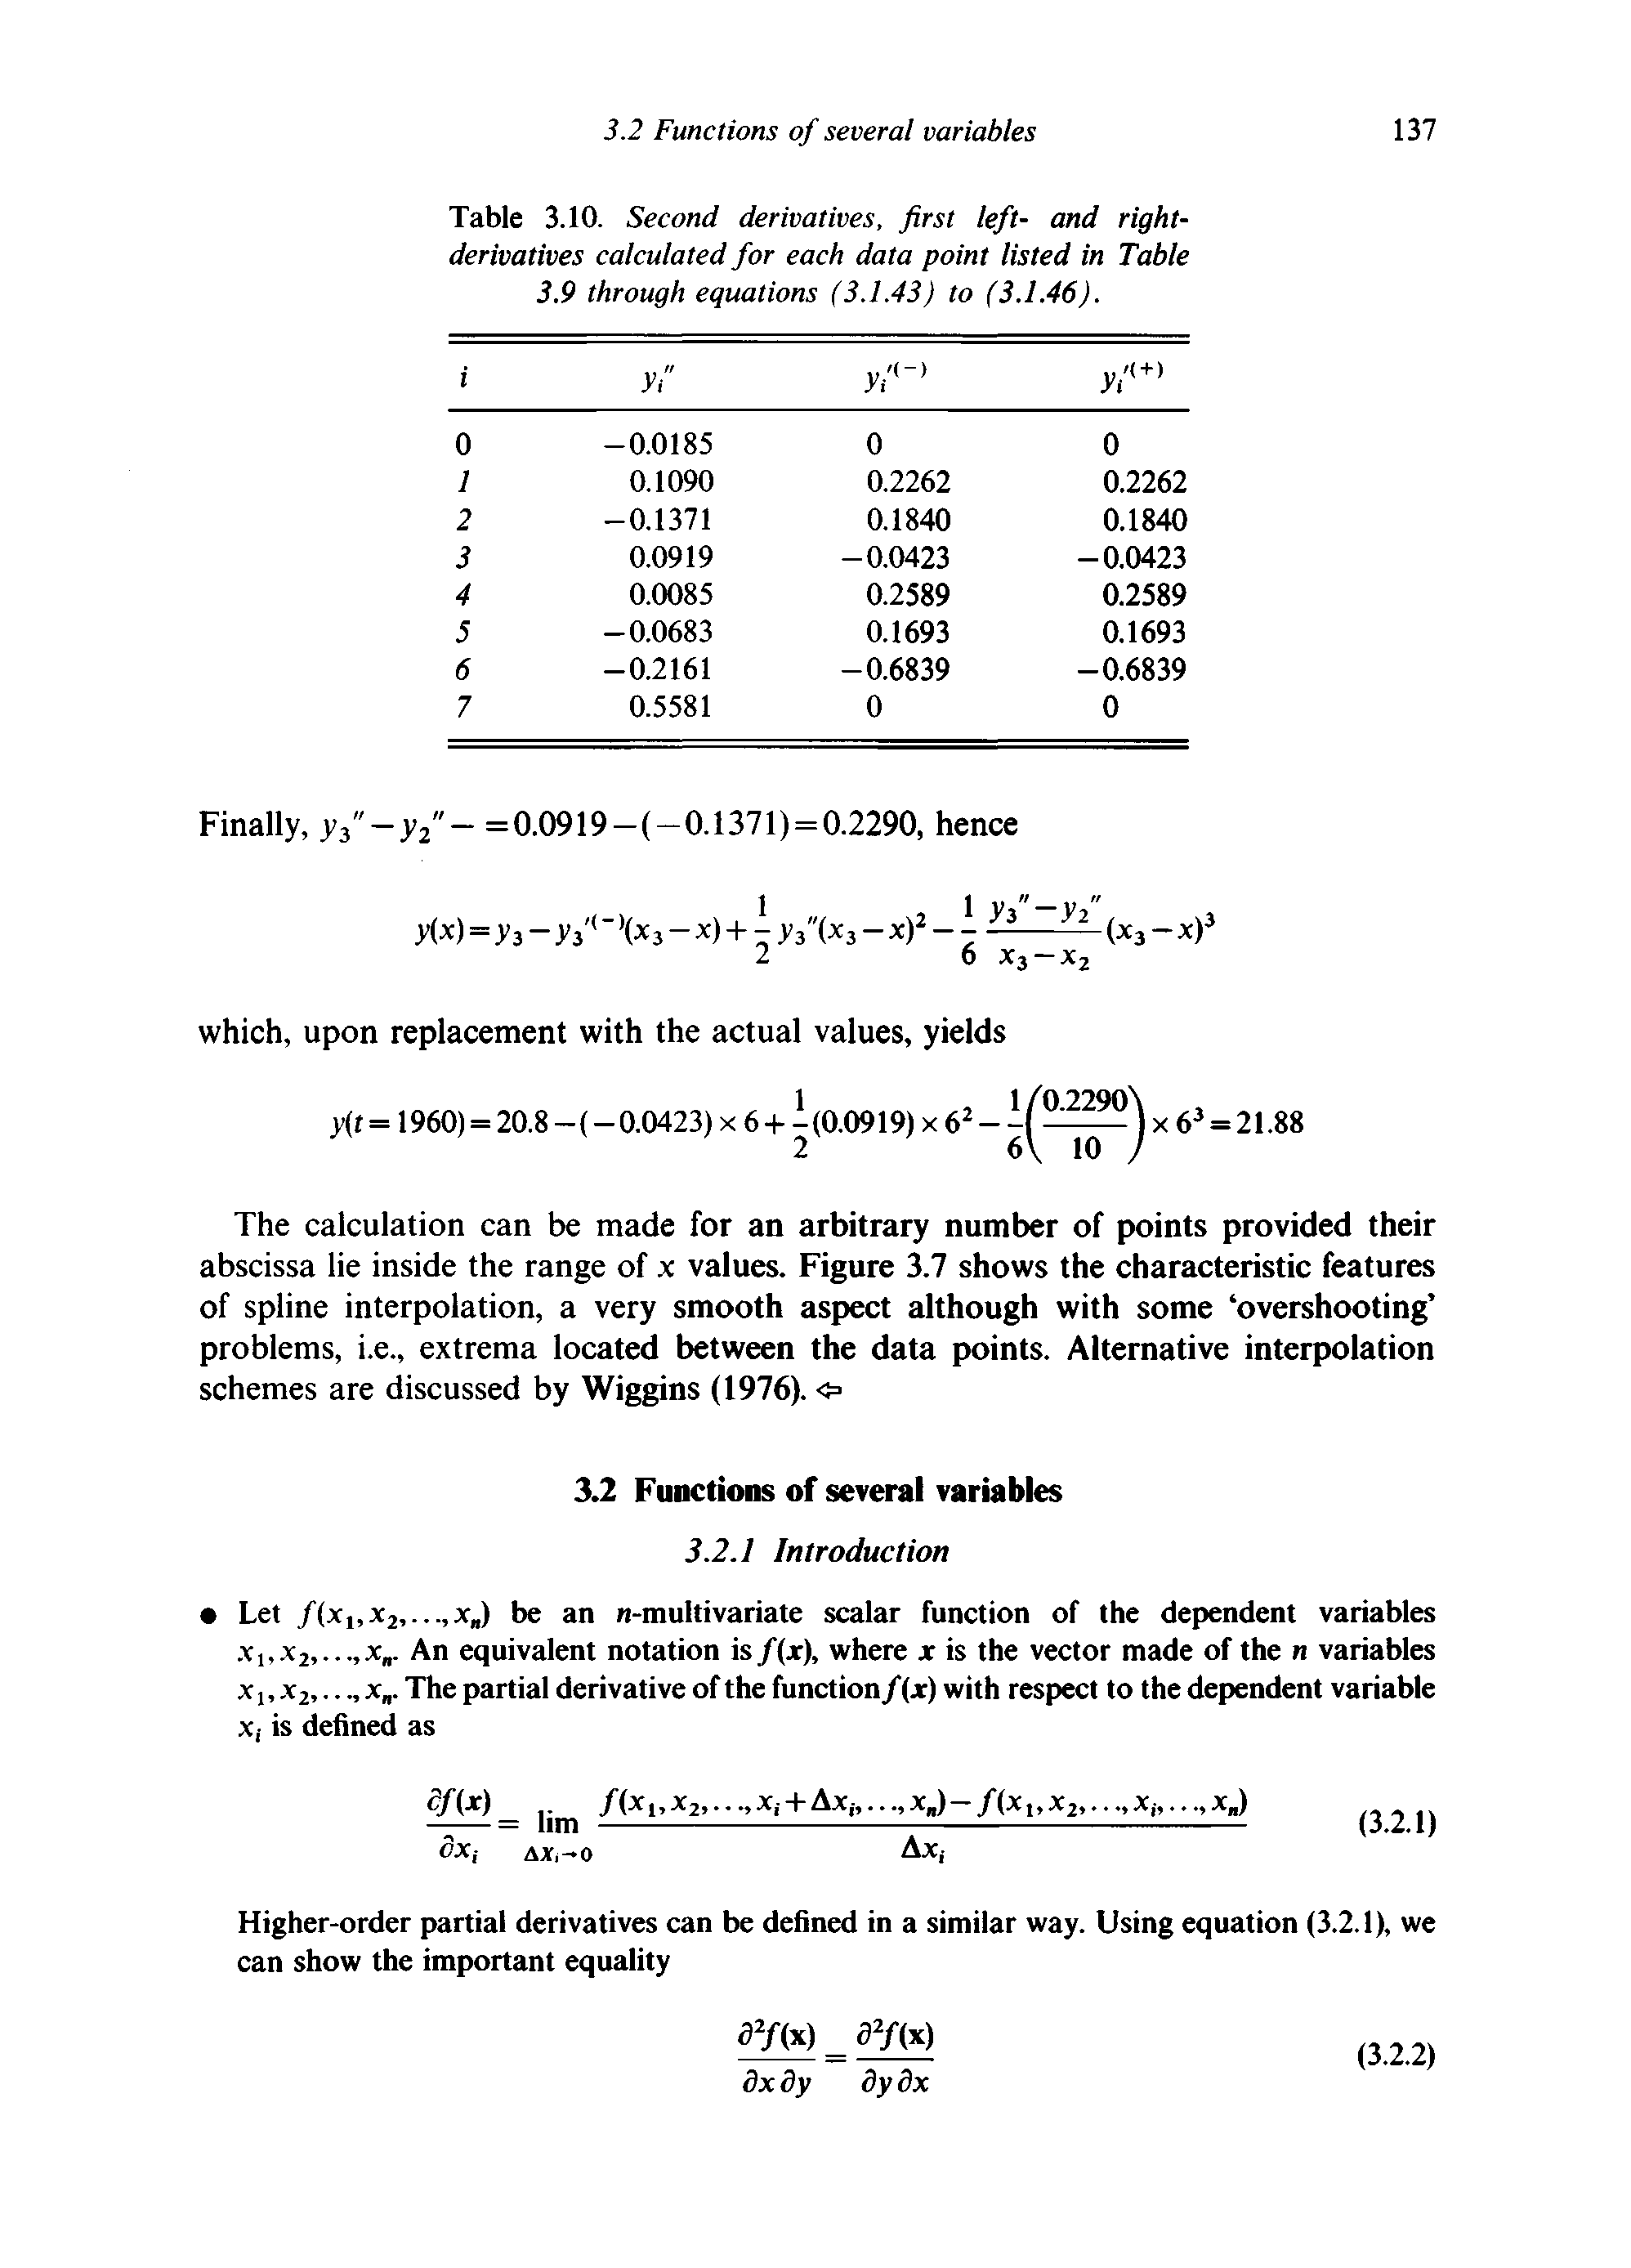 Table 3.10. Second derivatives, first left- and right-derivatives calculated for each data point listed in Table 3.9 through equations (3.1.43) to (3.1.46).